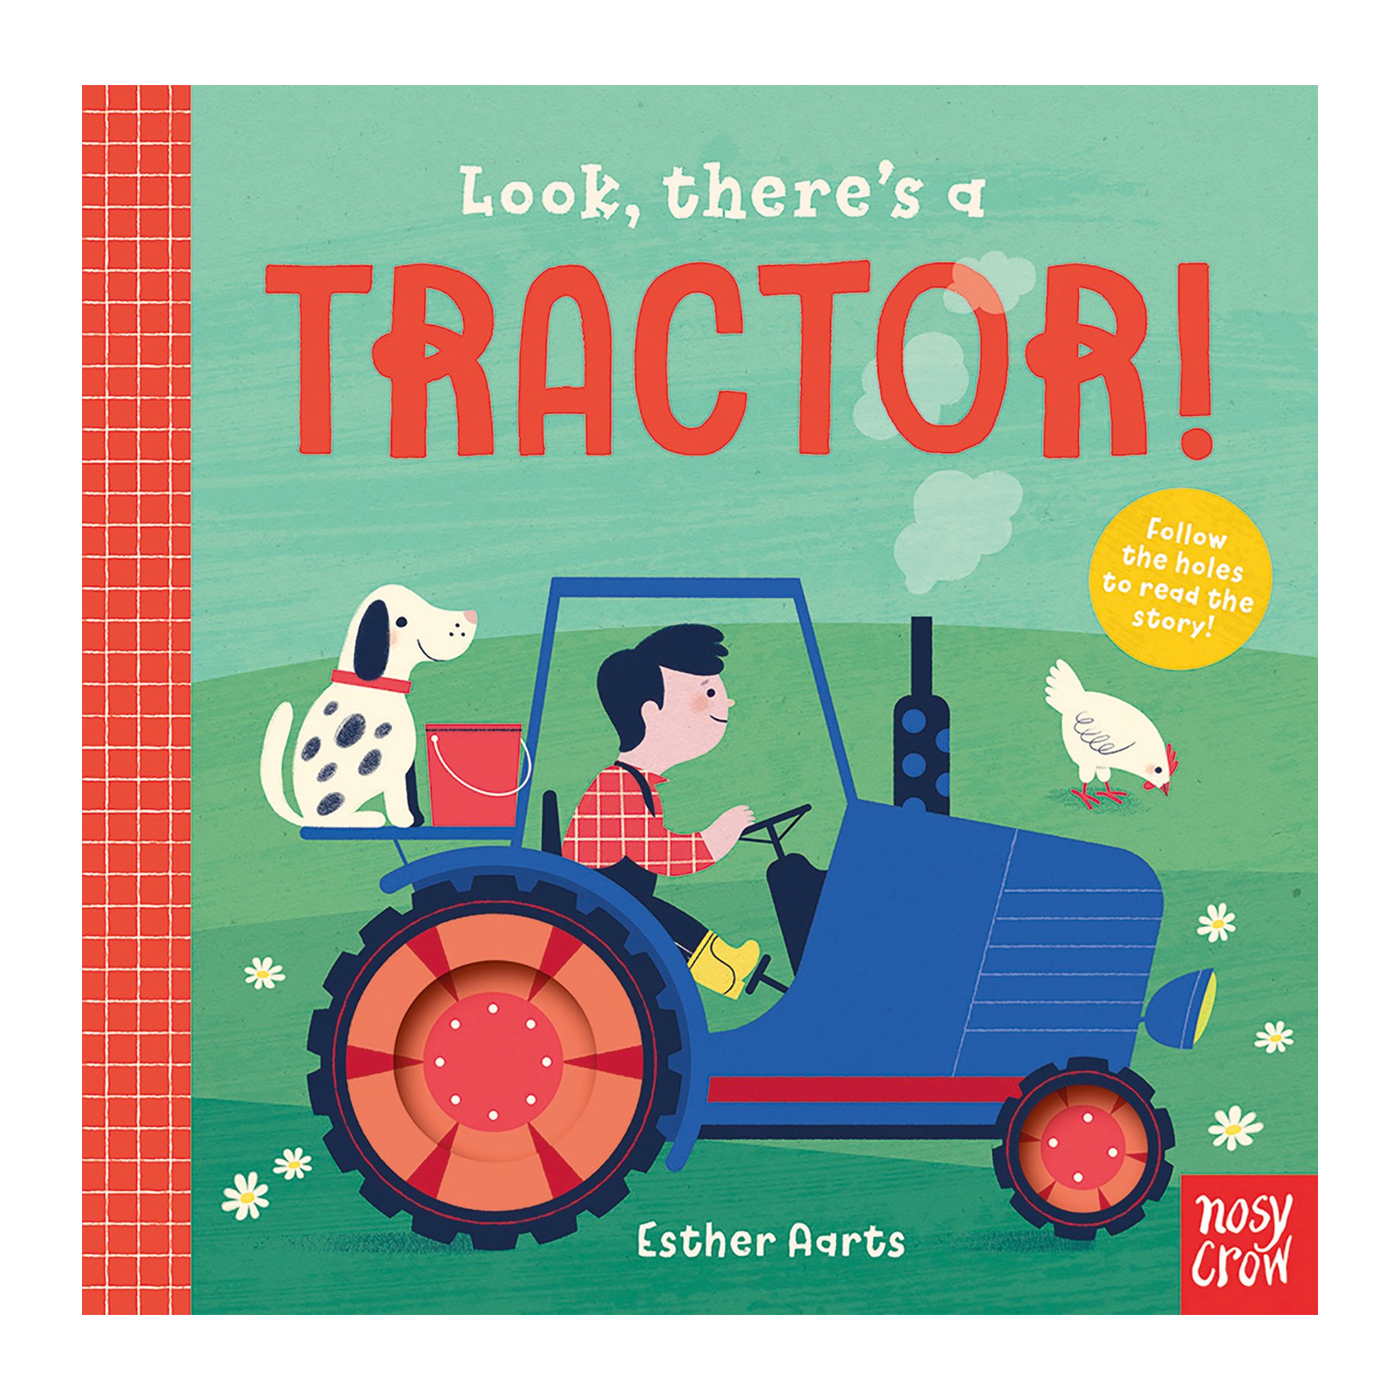  Look, there's a Tractor!